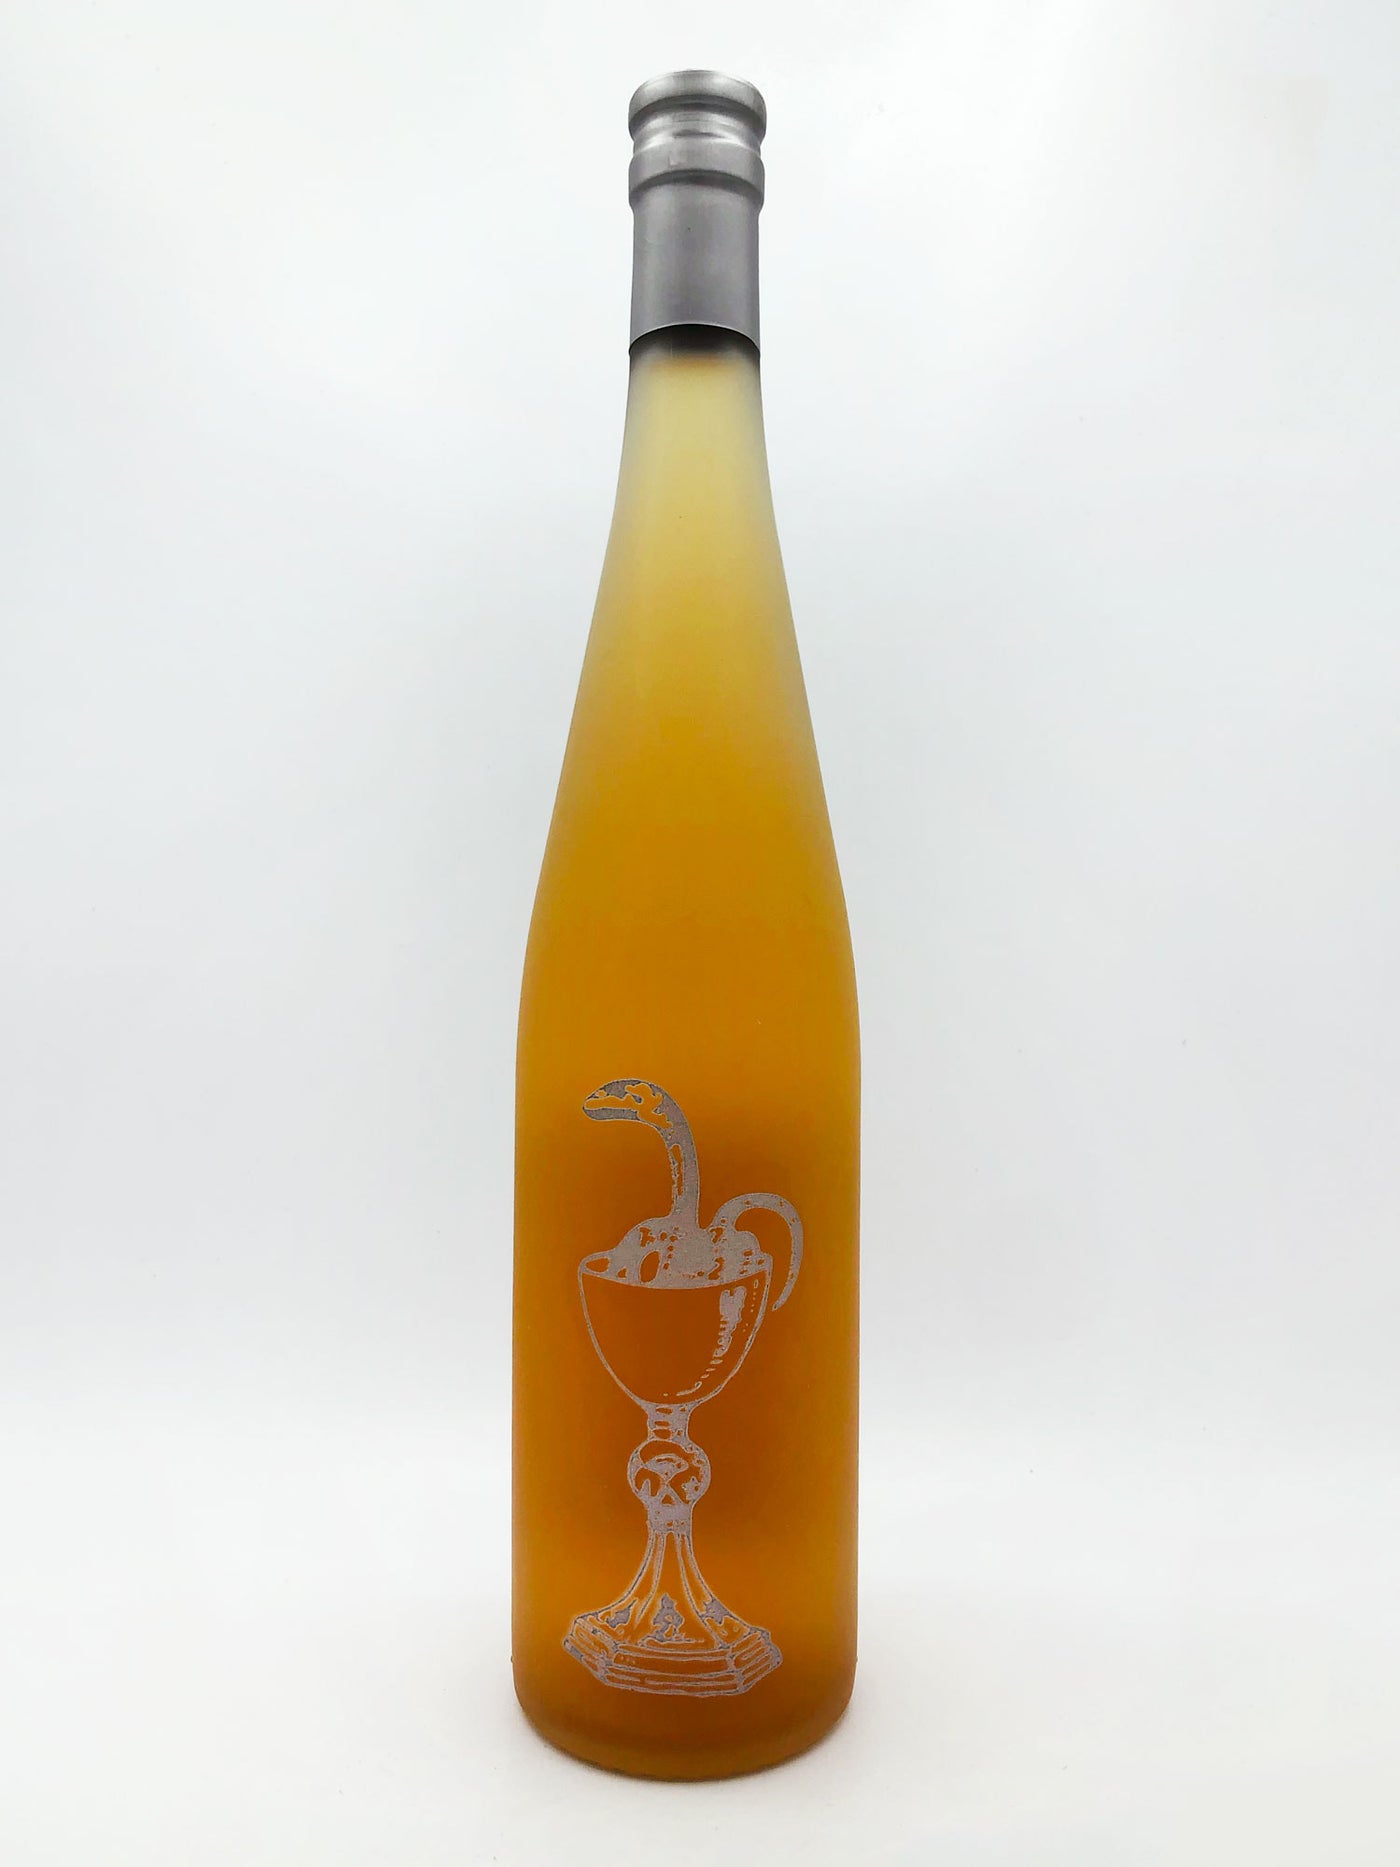 Enlightenment Wines Nought Mead NV